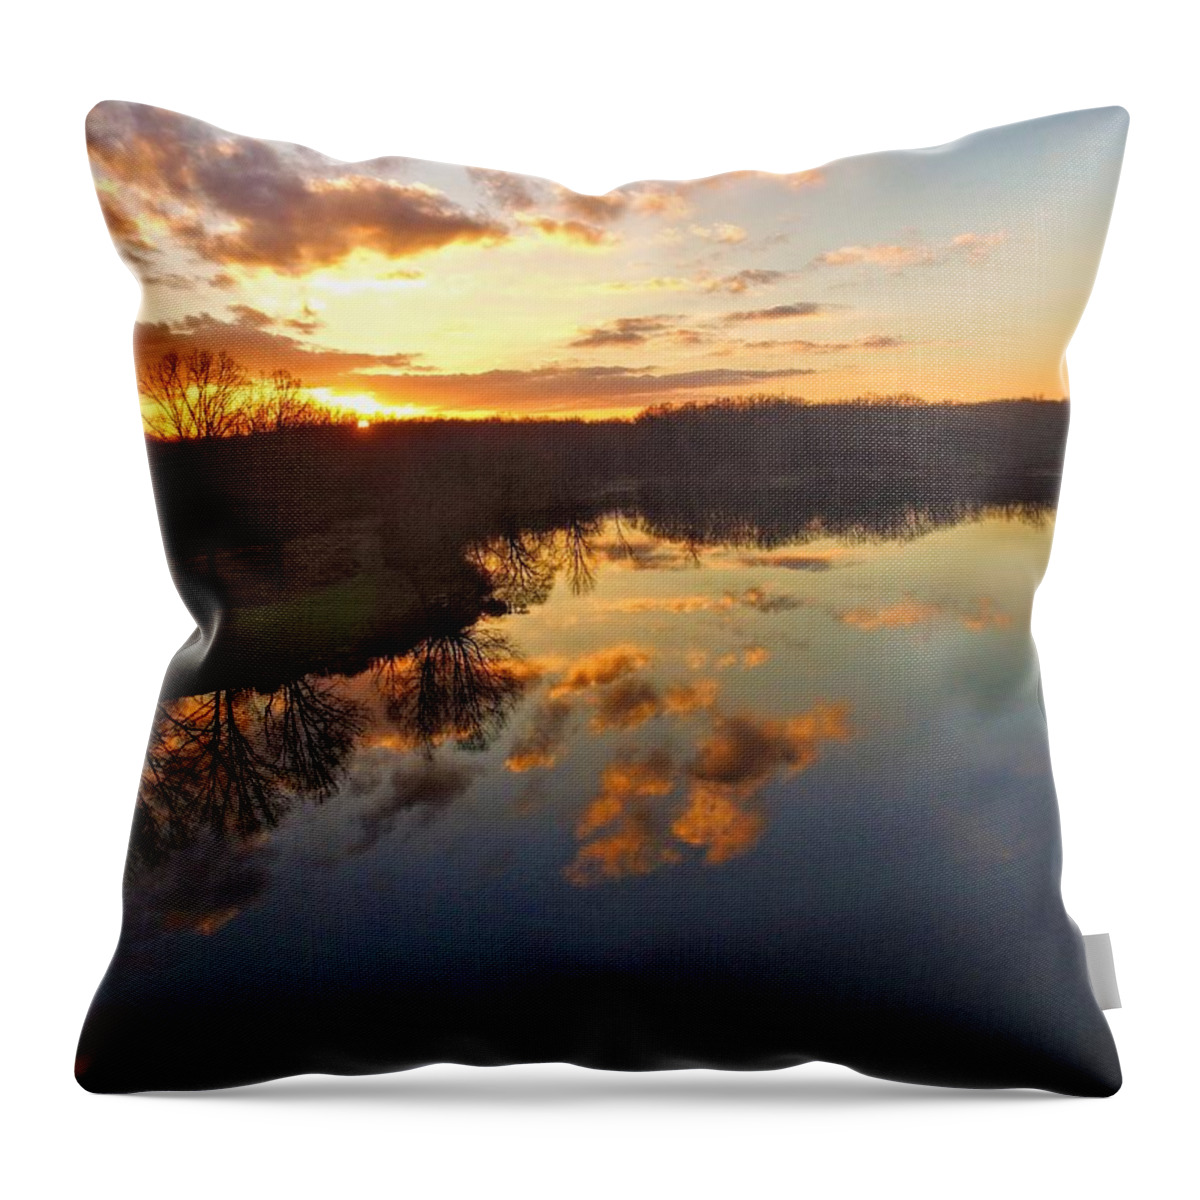  Throw Pillow featuring the photograph Tinkers Creek Park by Brad Nellis